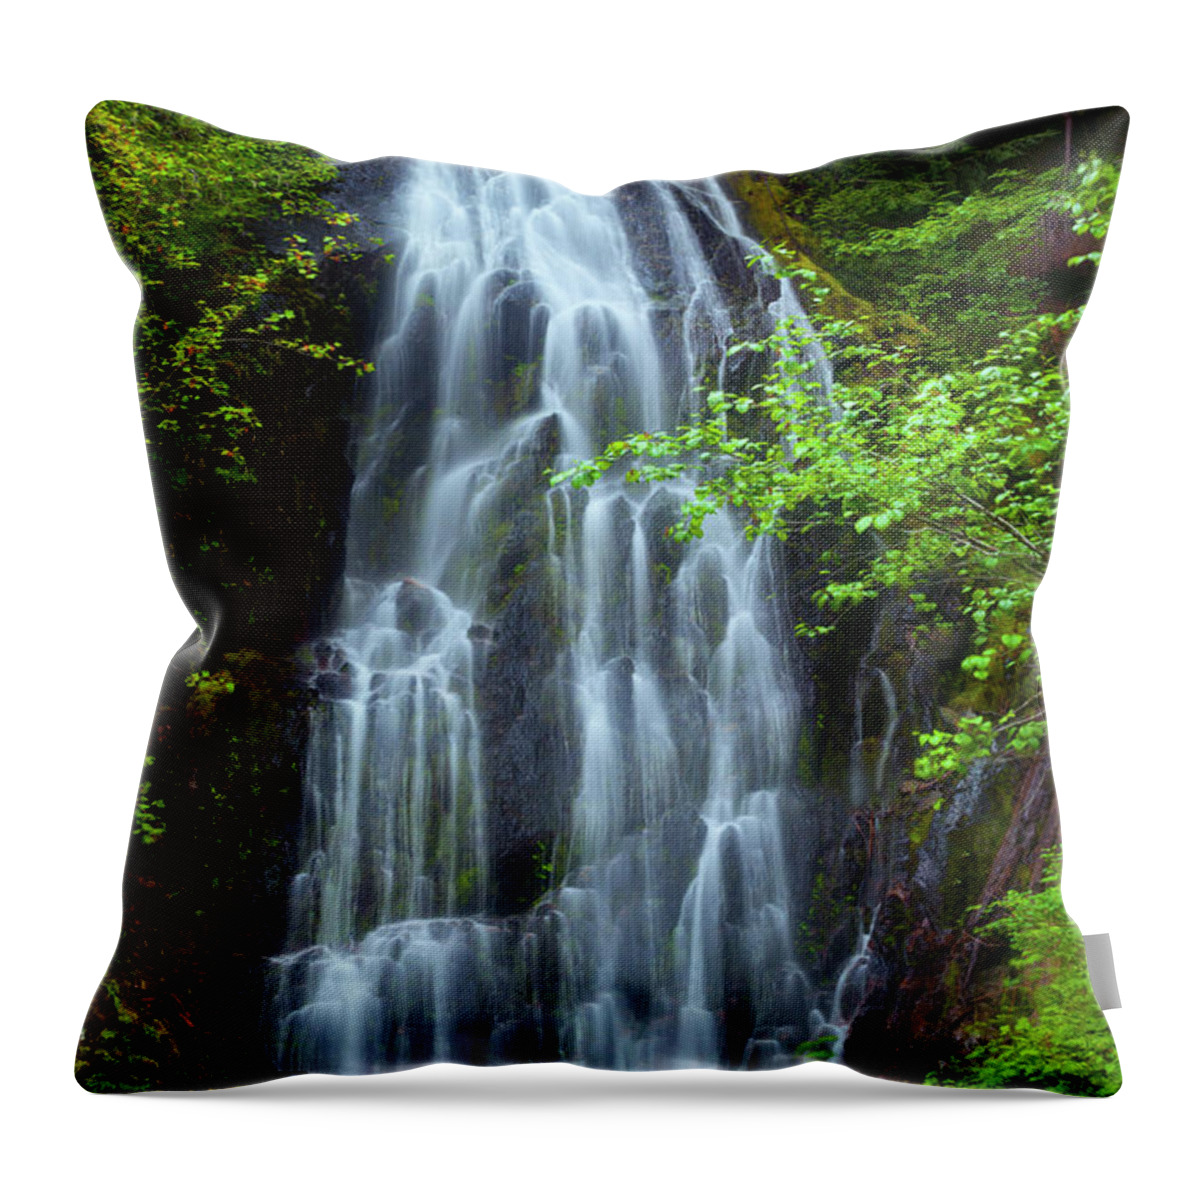 Waterfall Throw Pillow featuring the photograph Forest Lace by Michael Dawson